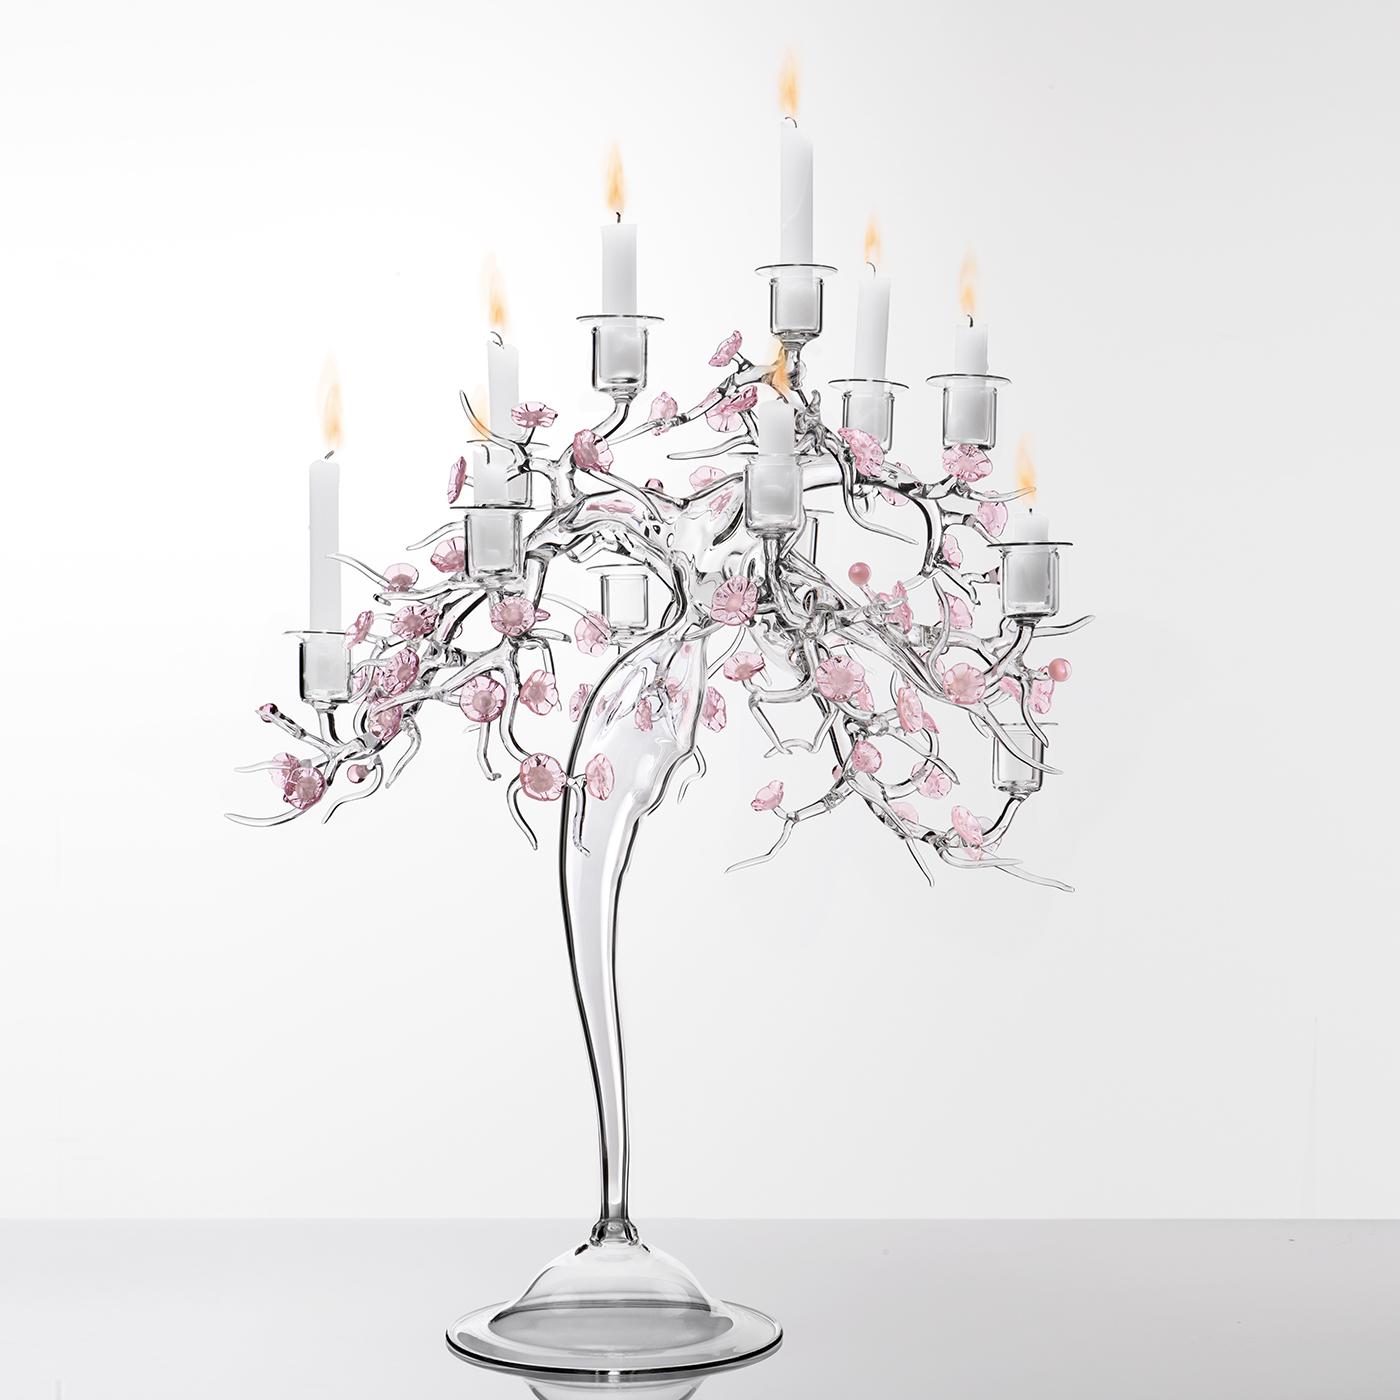 Defined by powerful aesthetic impact, this exclusive borosilicate glass-blown candelabra was handcrafted using Crestani's trademark technique of flame-working. Inspired by the Japanese cherry blossom, this objet d'art showcases elaborated branches